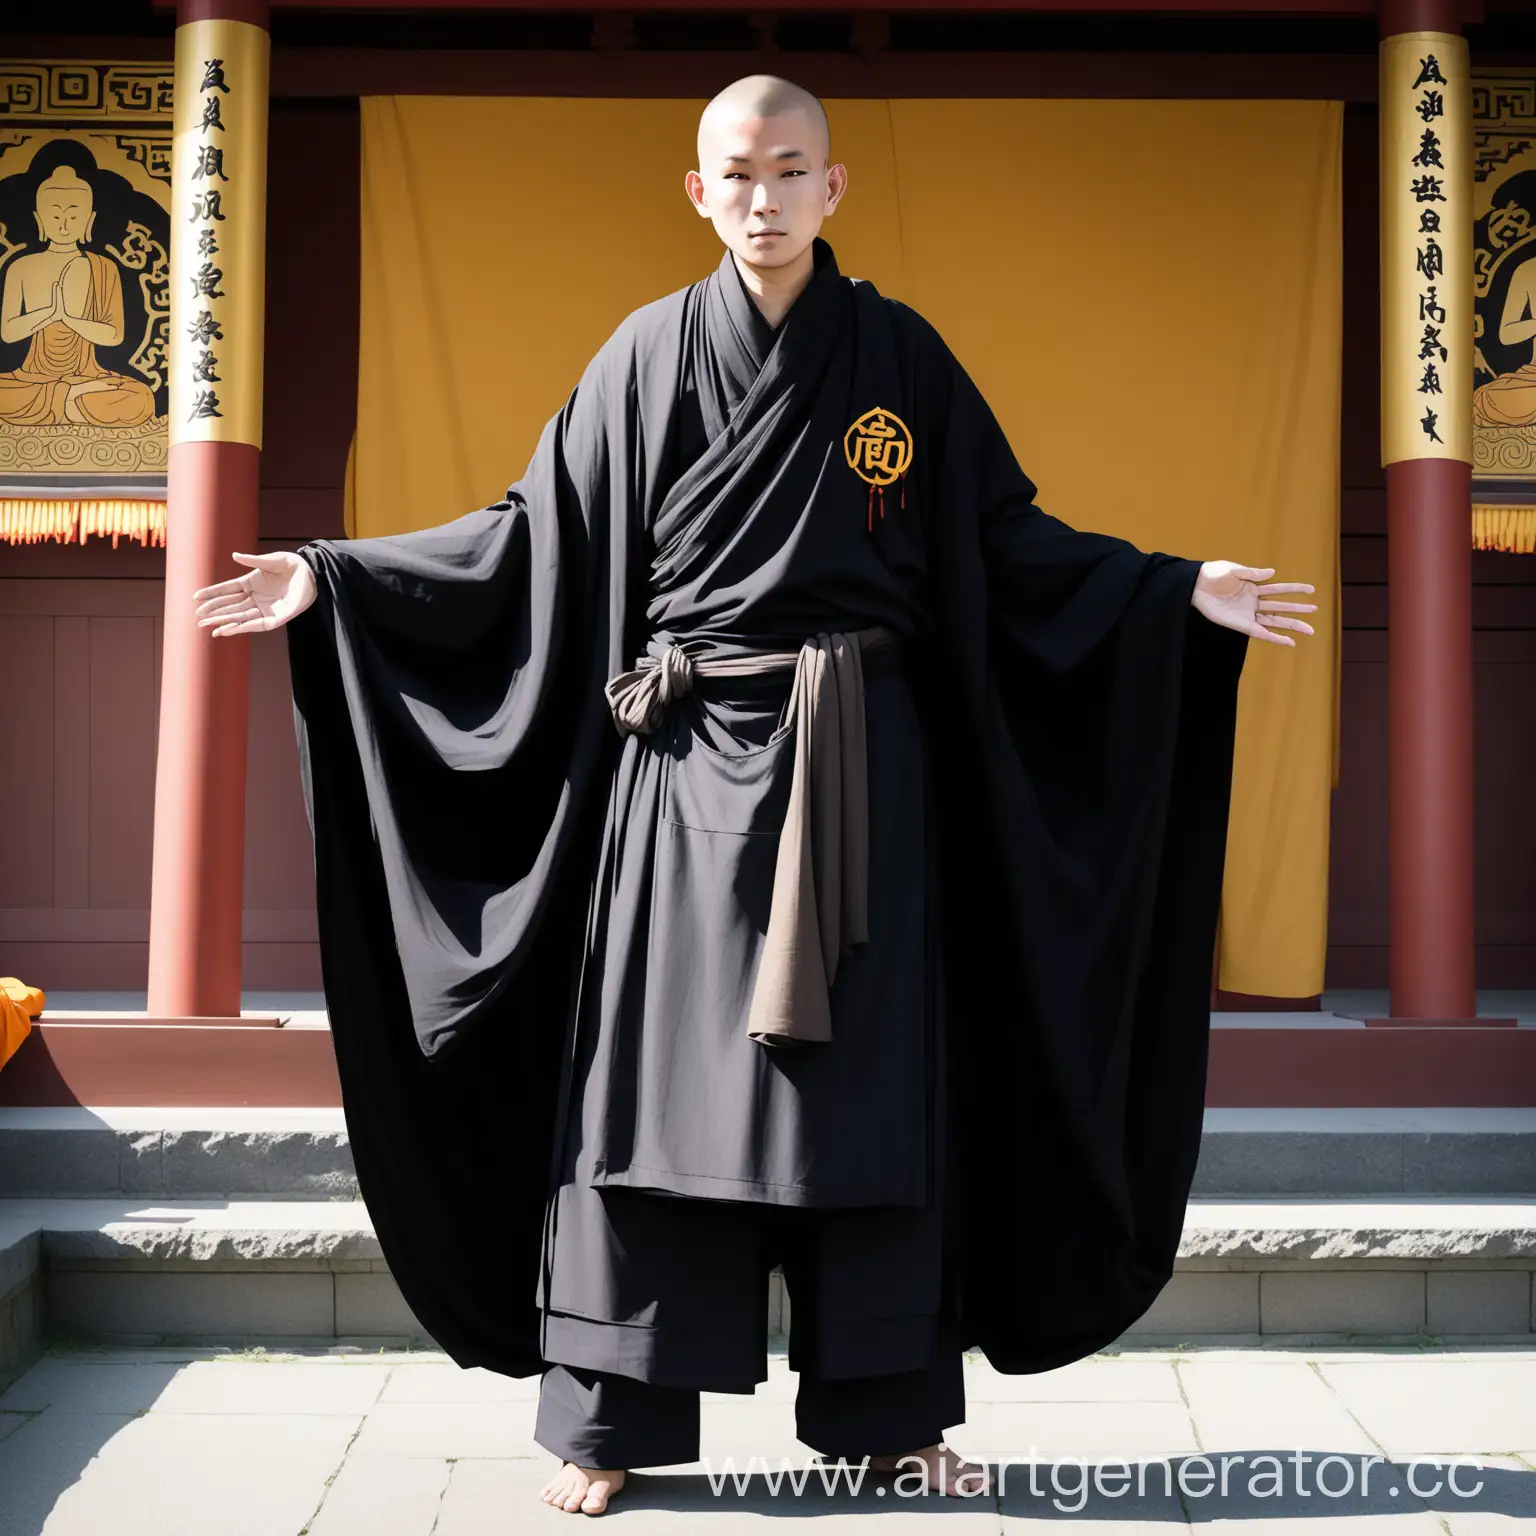 Buddhist-Monk-Attired-in-Traditional-Black-Garb-with-Symbolic-Mantra-Apron